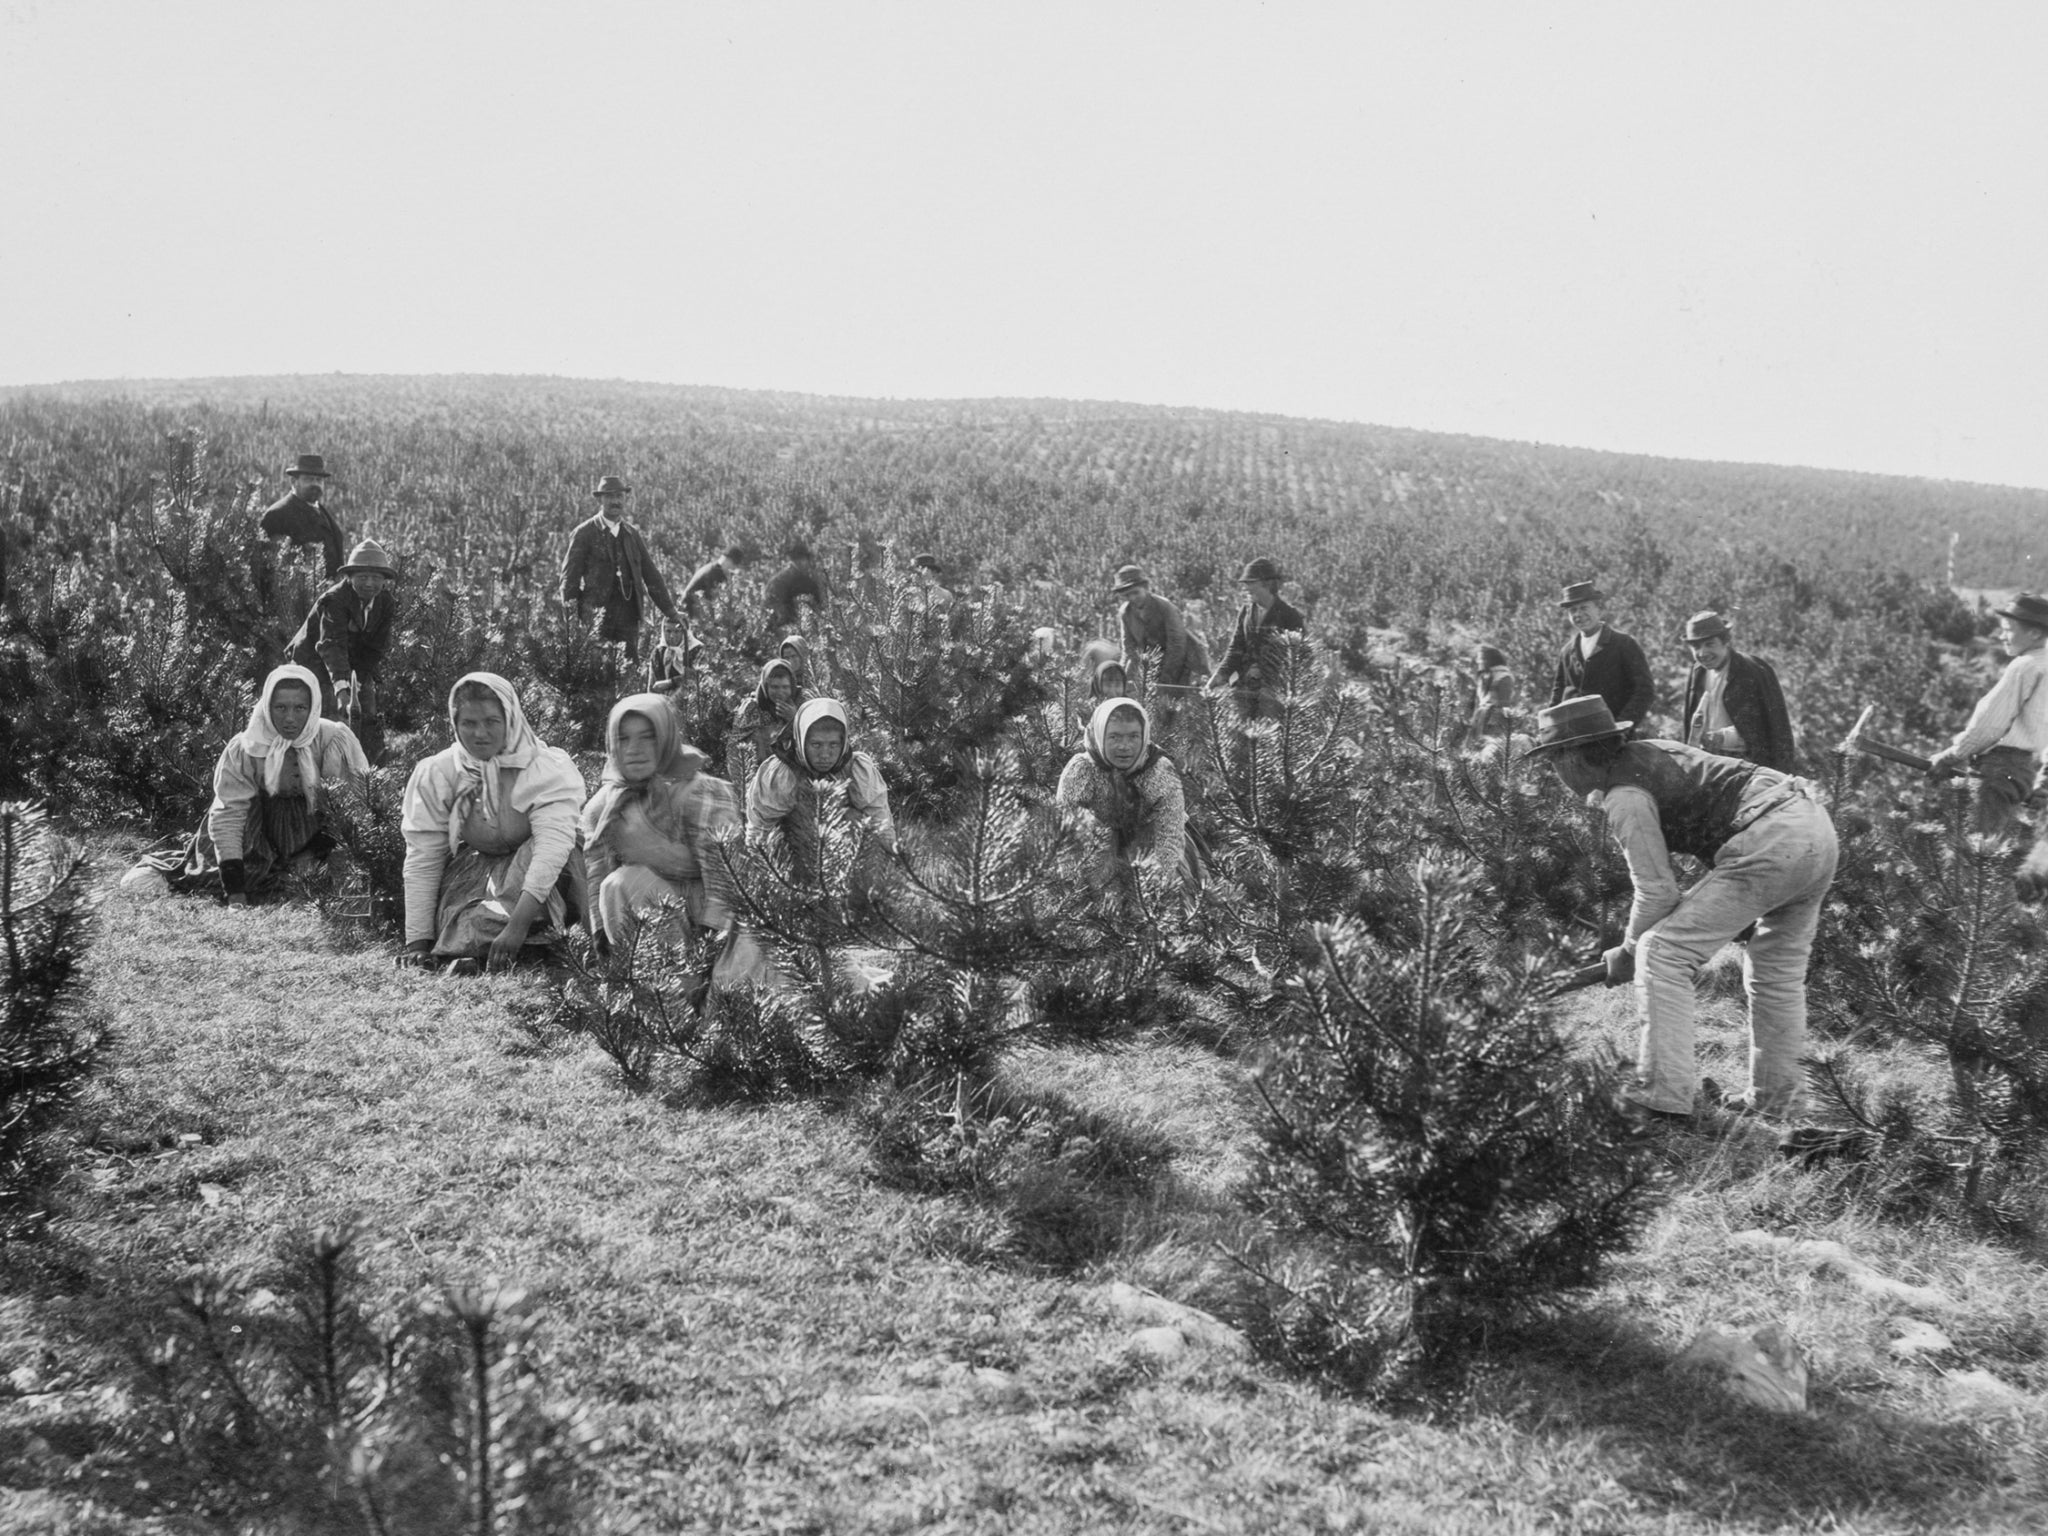 It takes a village. Residents contribute to reforestation efforts in the Bazzoni forest, Italy. Photo: B. Circovich